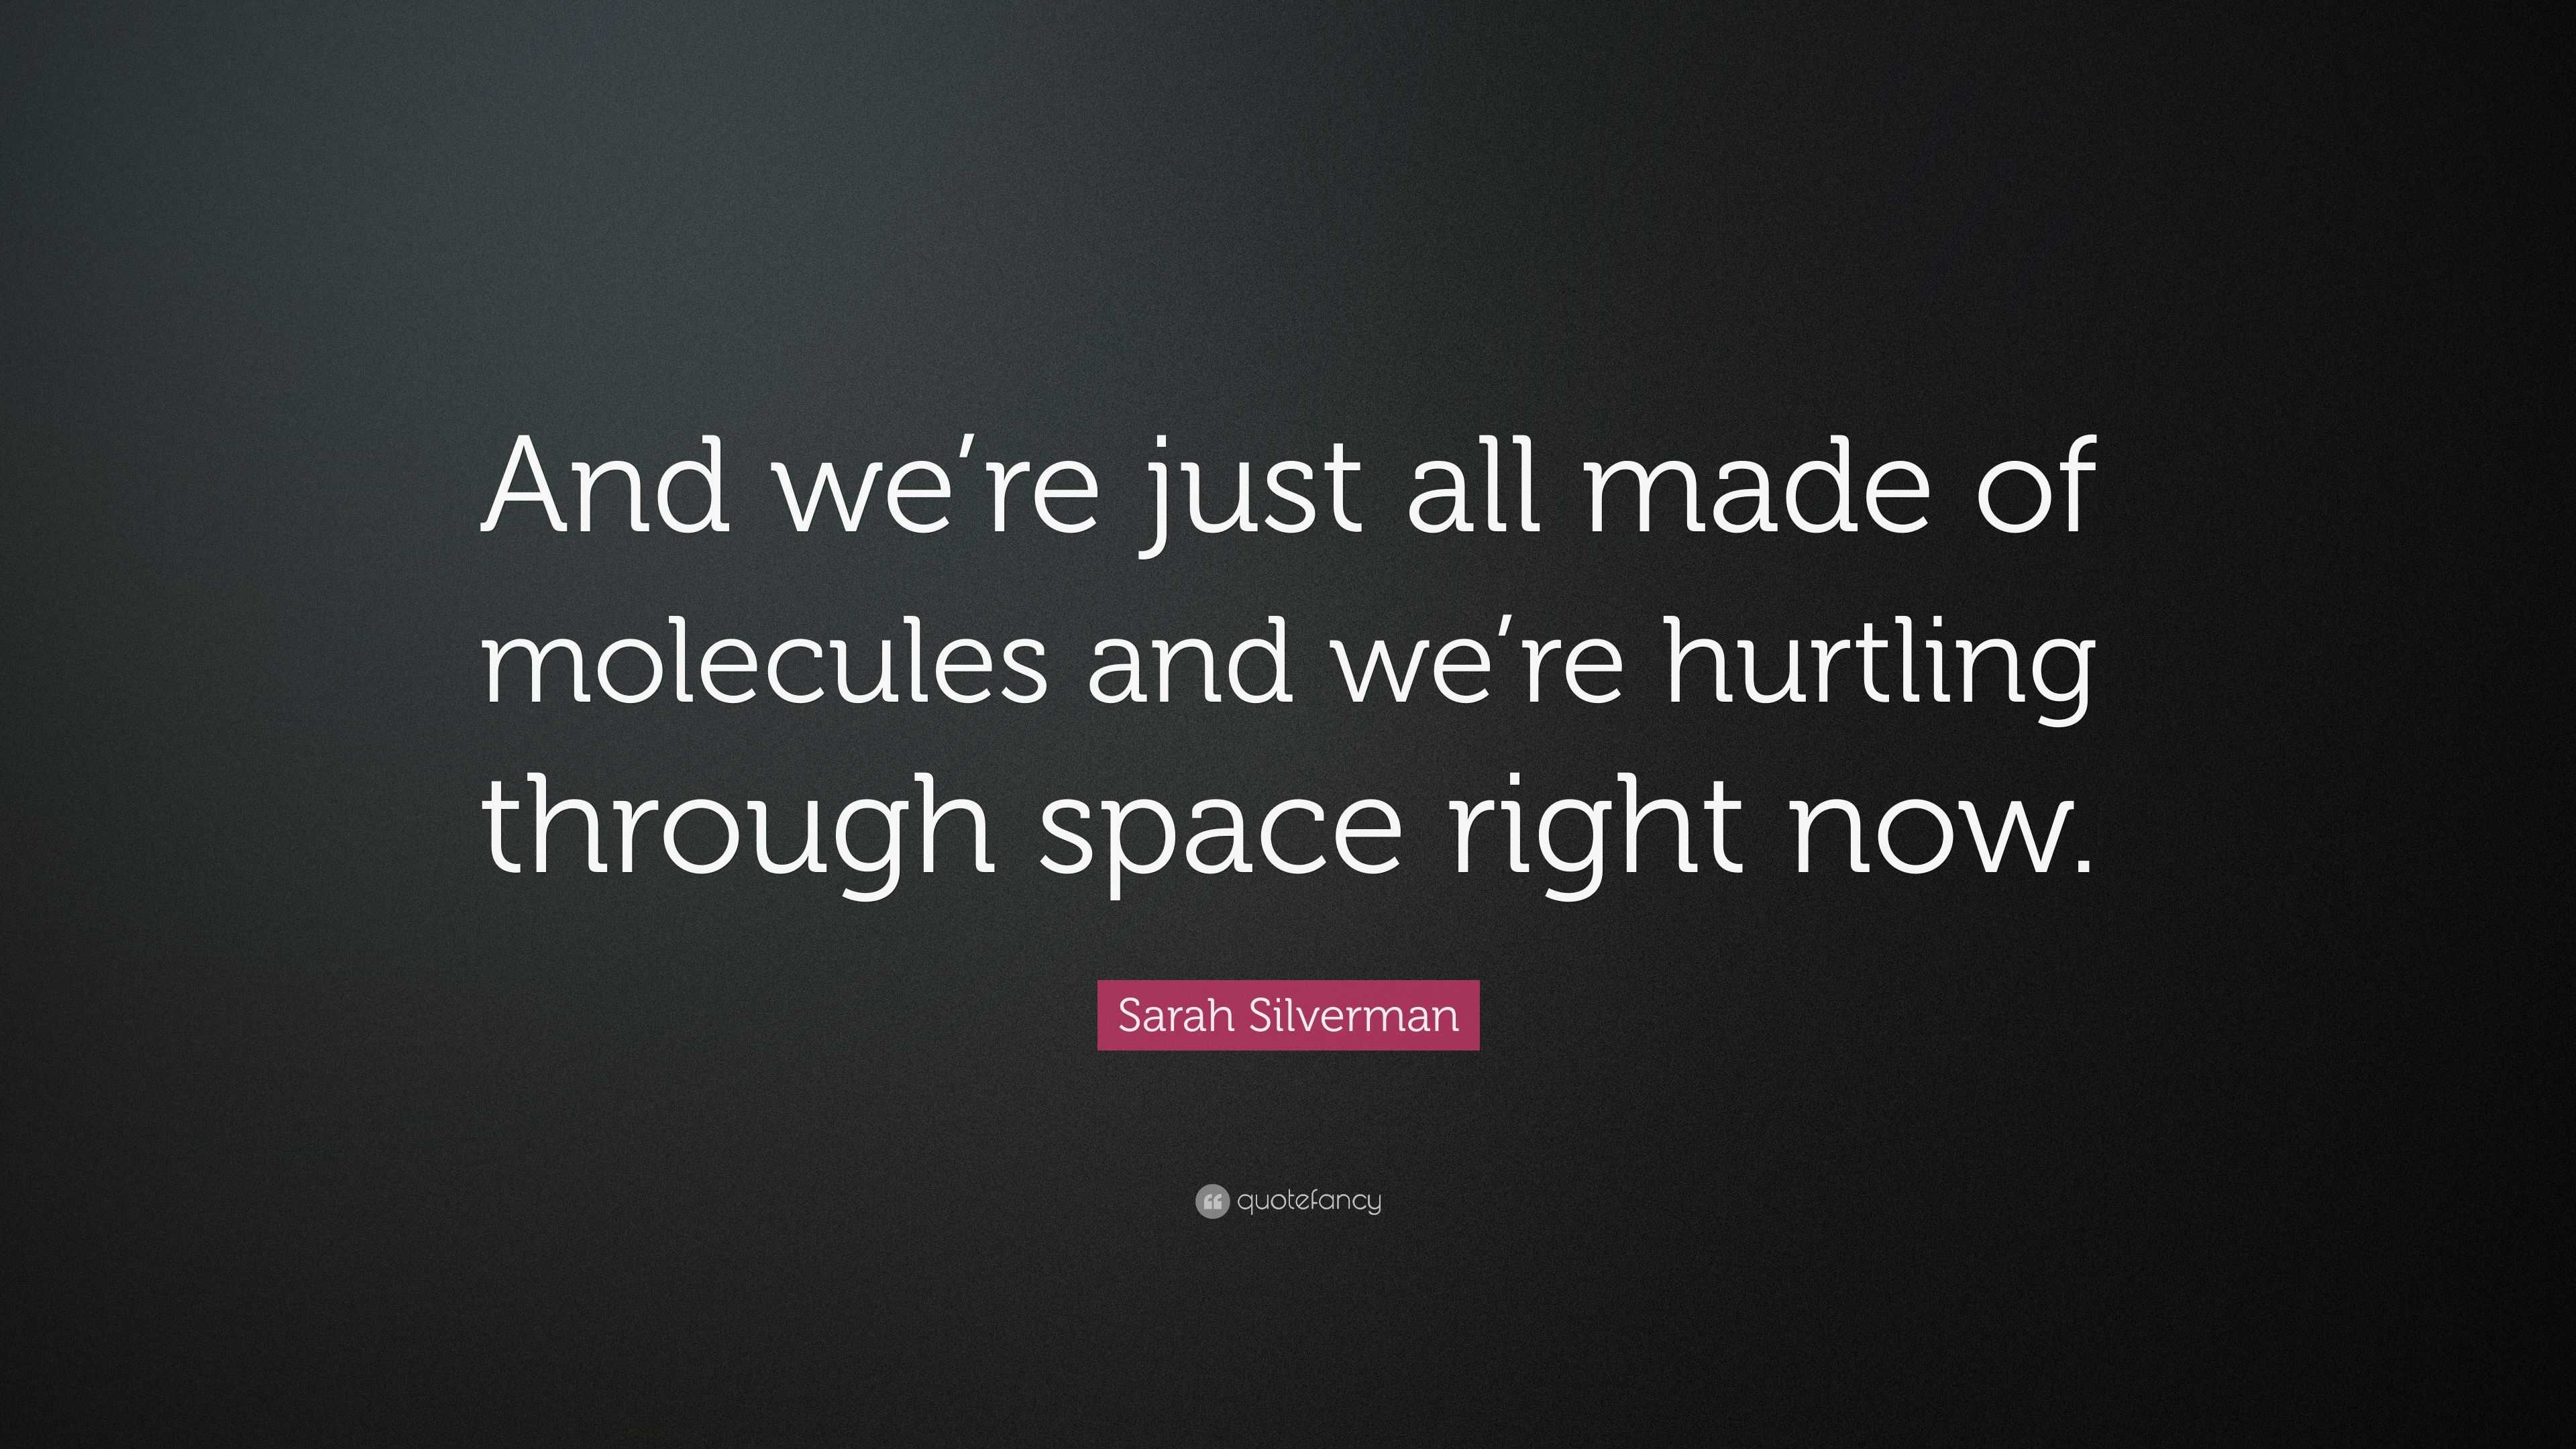 Sarah Silverman Quote: “And we’re just all made of molecules and we’re ...